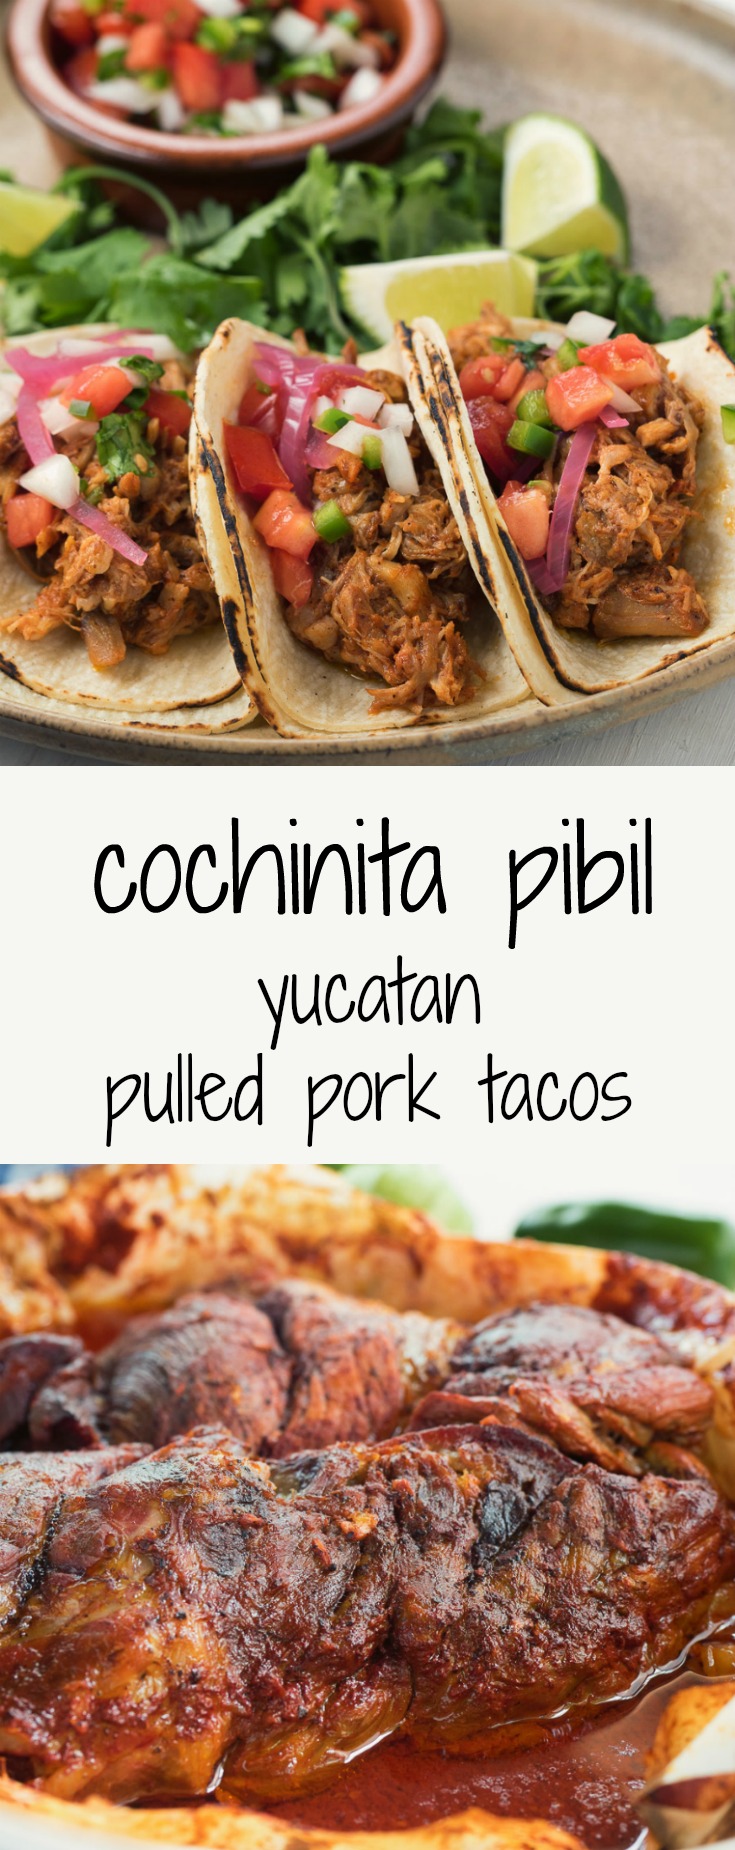 Yucatan pulled pork - cochinita pibil is Mexico's answer to the American classic and it is awesome!